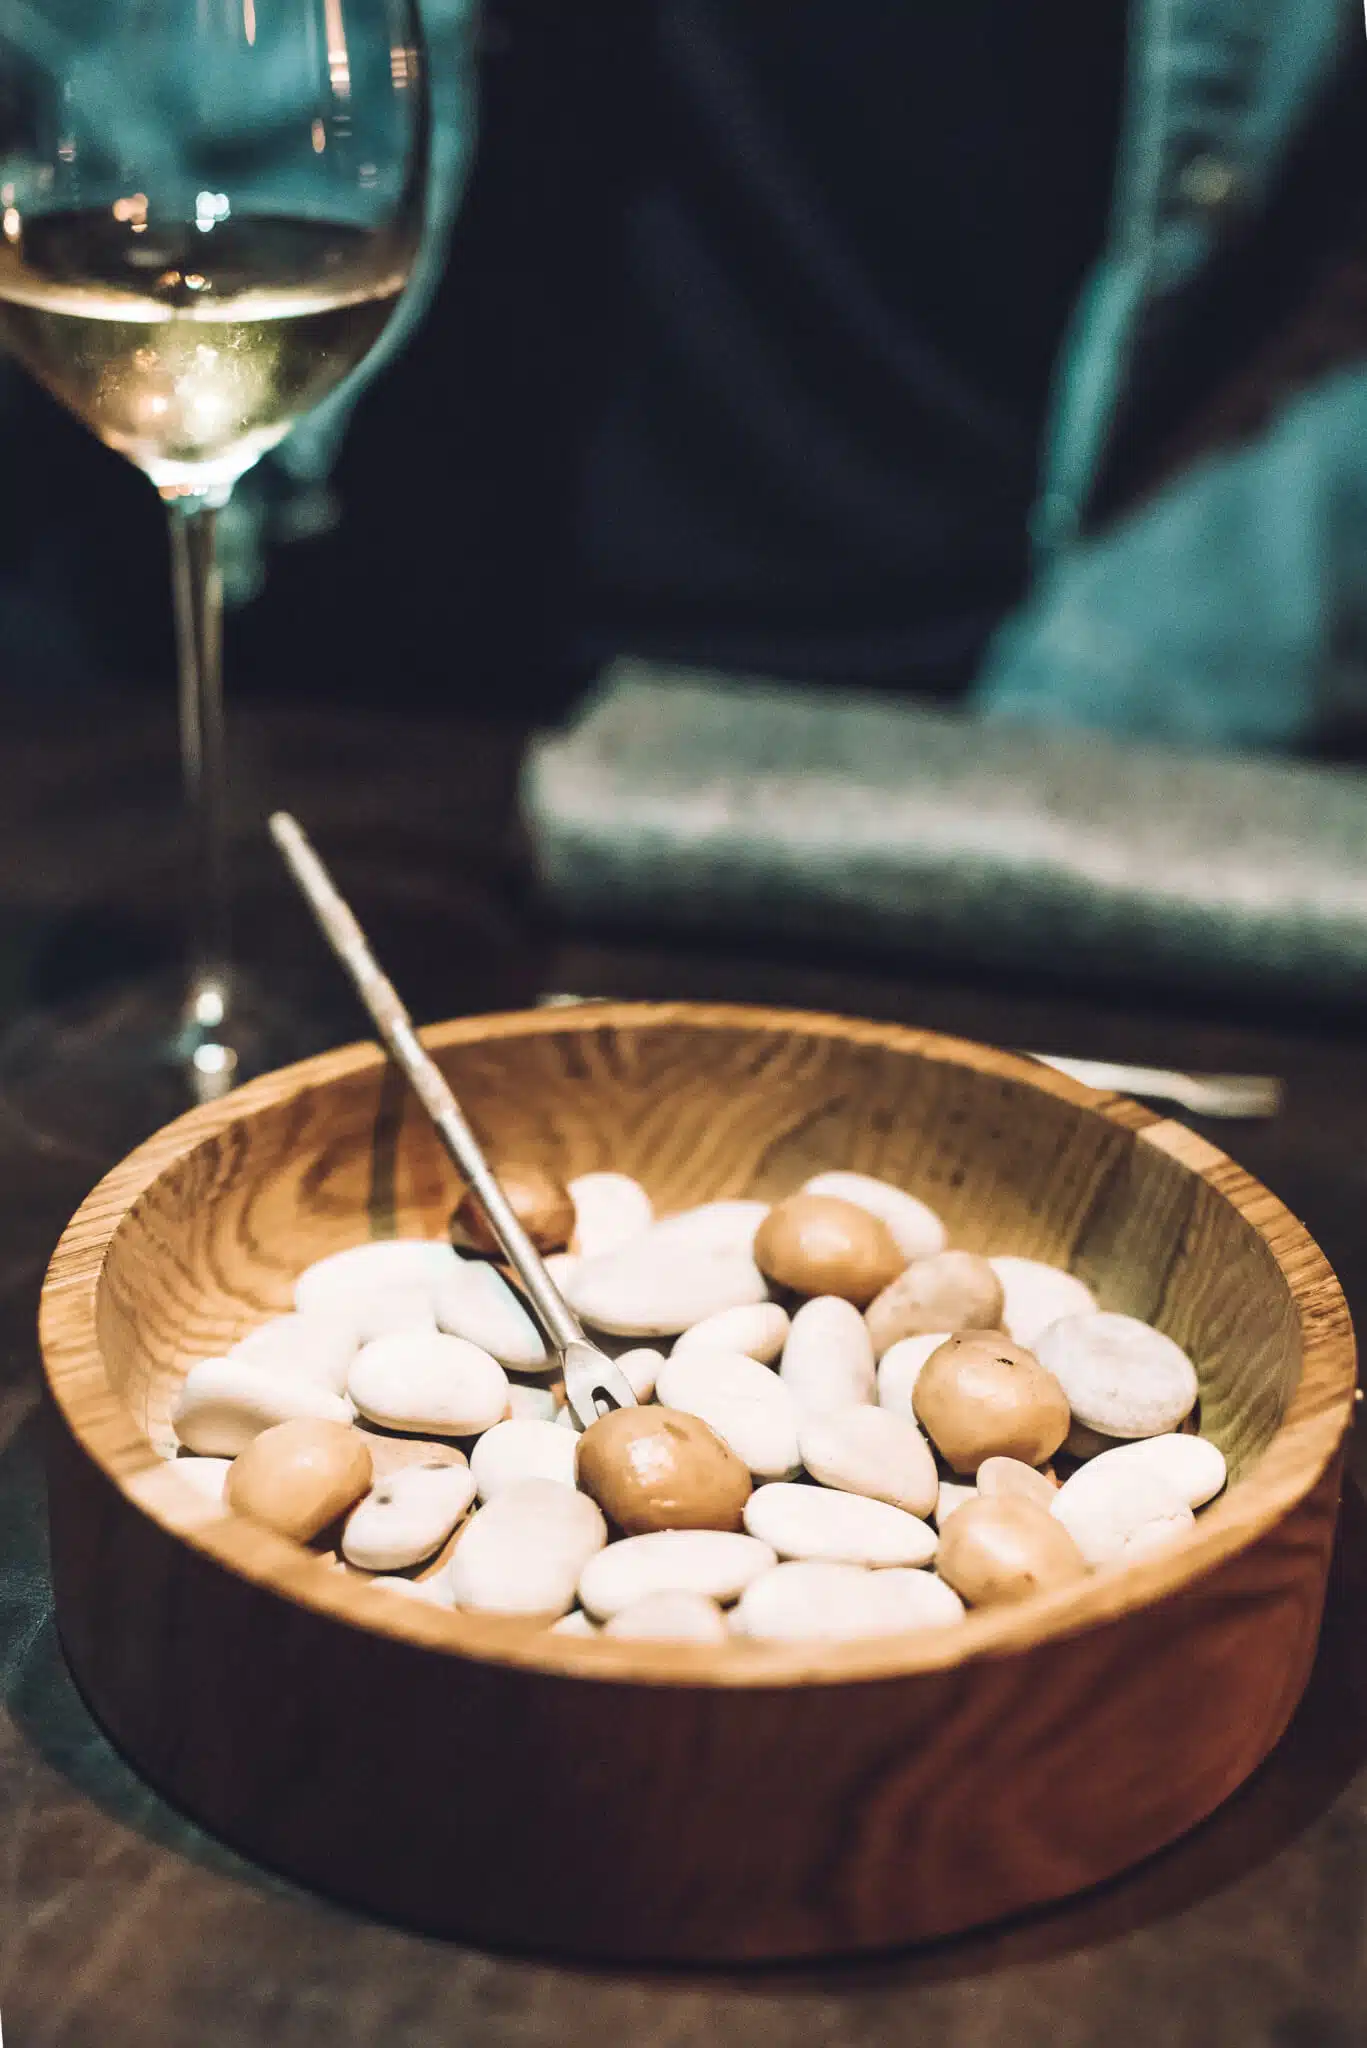 Asian | Italian | Brunch | Nigh Out | Best Restaurants in Melbourne: 15 Melbourne Restaurants You Don't Want to Miss featured by popular San Francisco travel blogger What The Fab